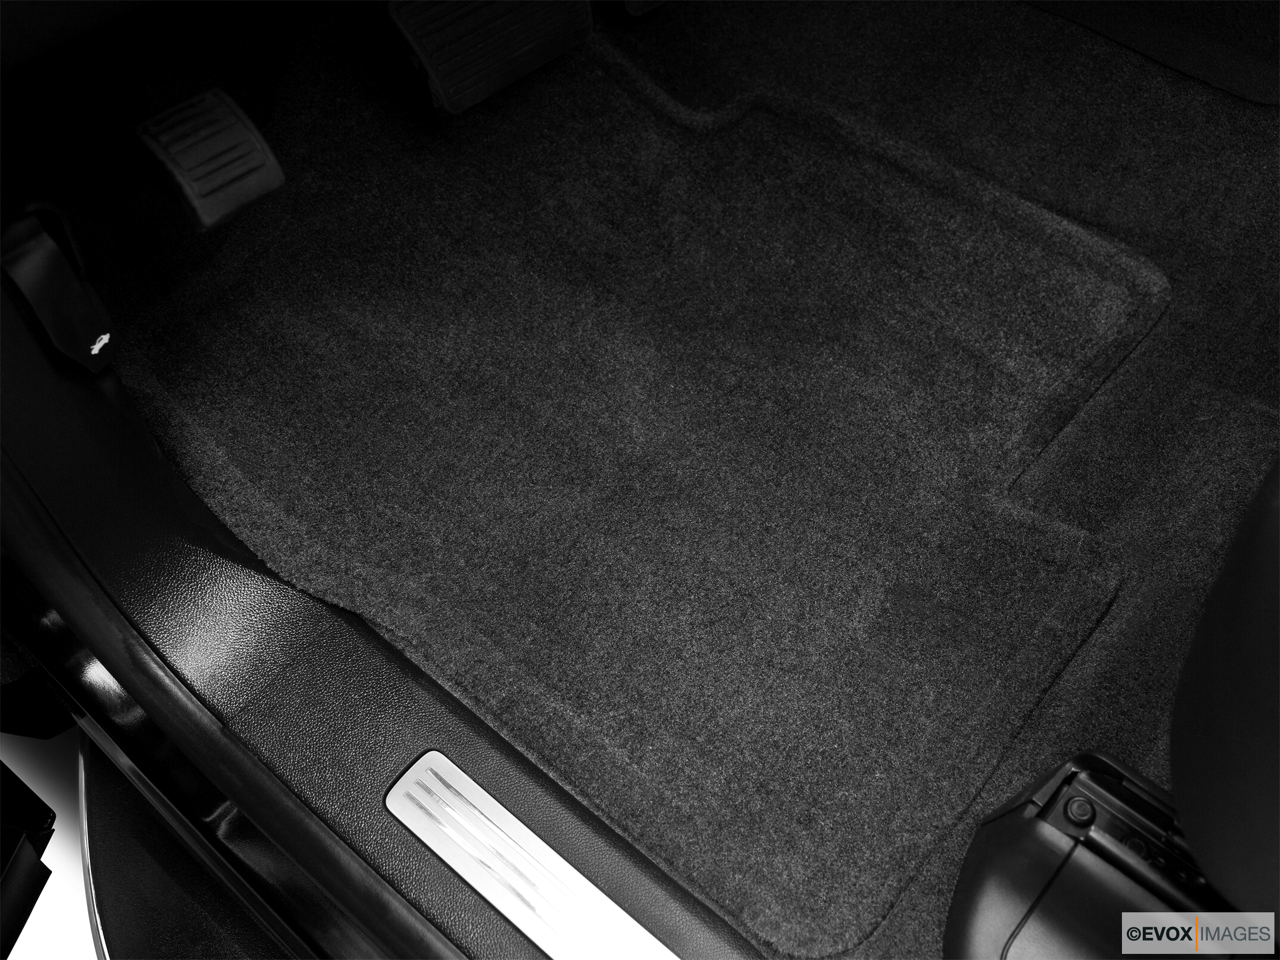 2010 Cadillac Escalade Hybrid Base Driver's floor mat and pedals. Mid-seat level from outside looking in. 